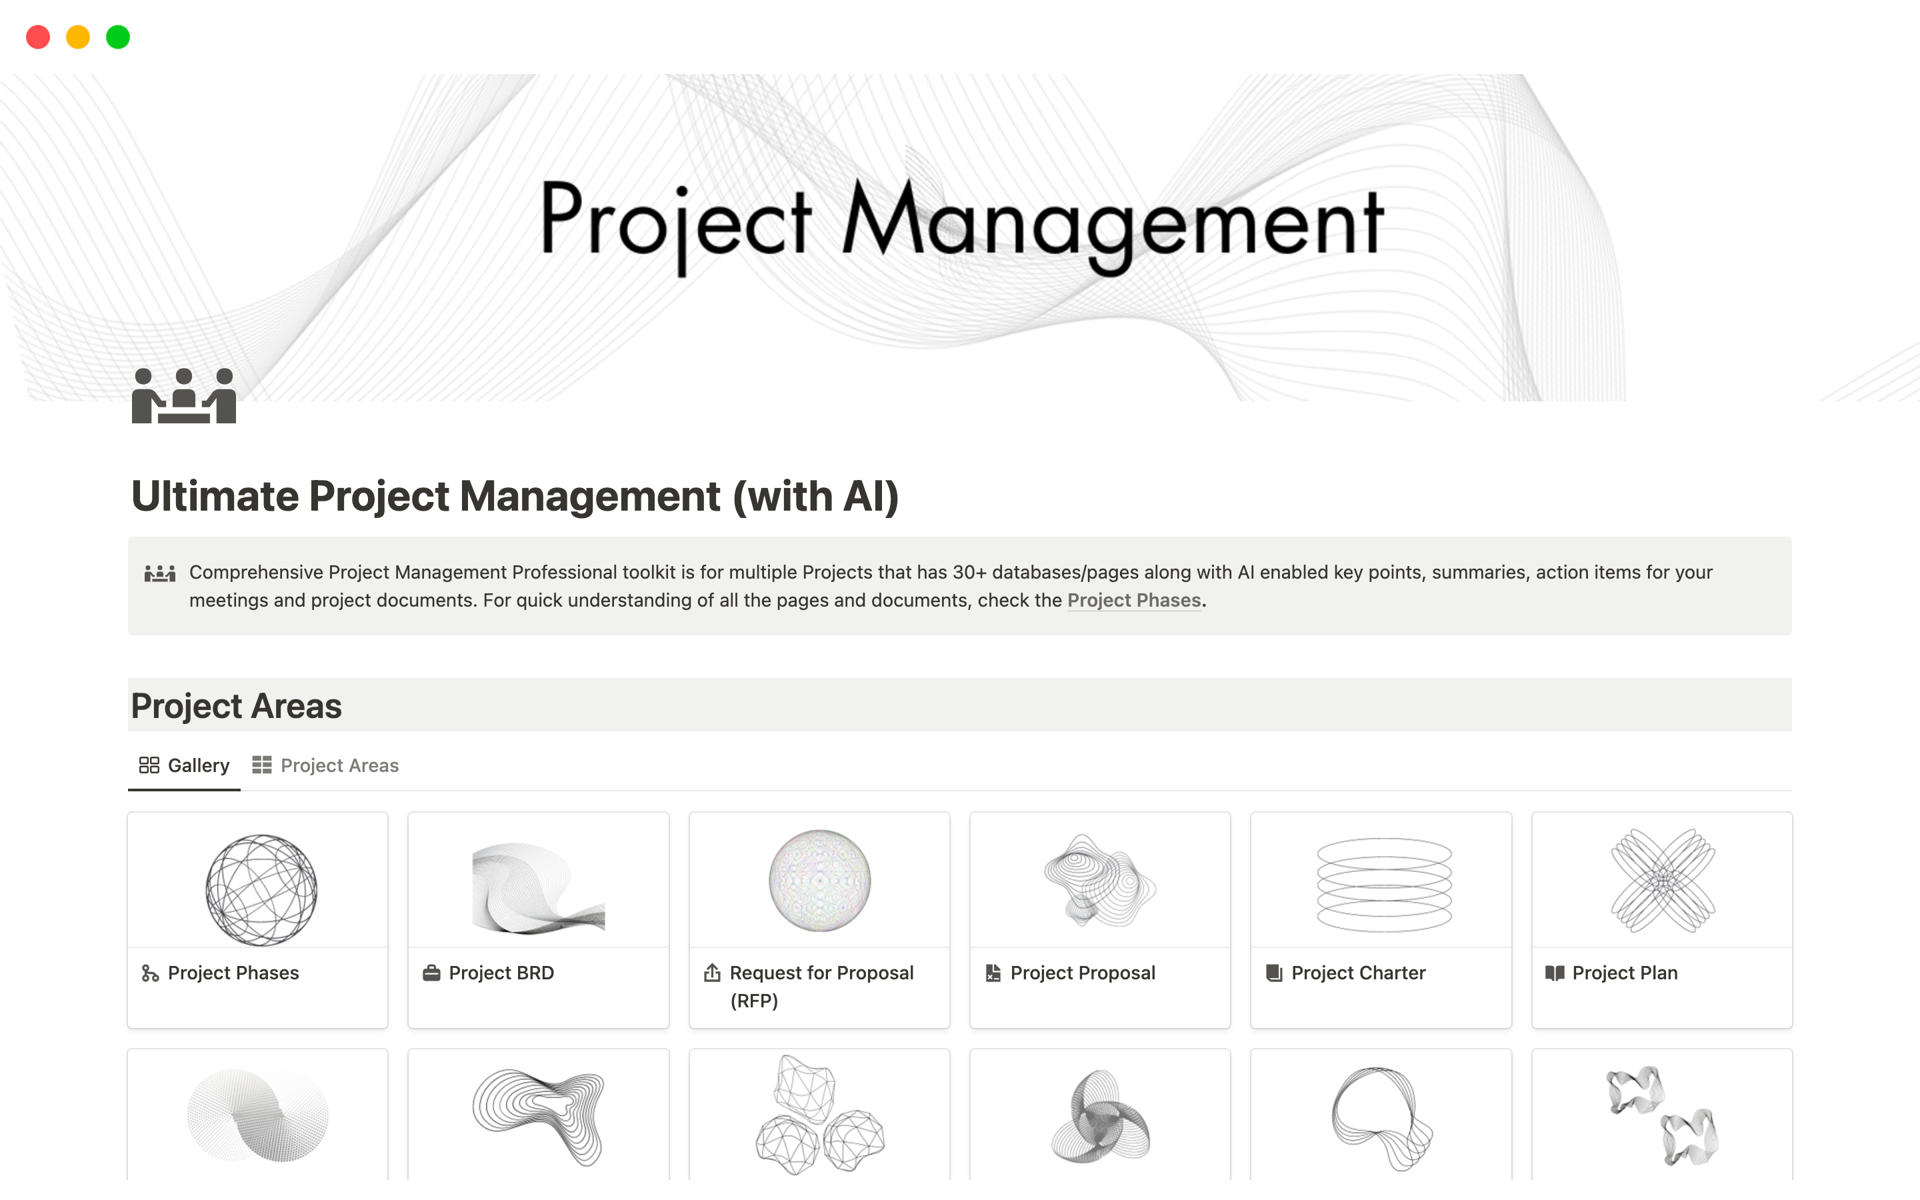 Project Management (with AI) is a 30+ Pages/Databases comprehensive template with a structured layout and dedicated sections for each critical project phase and knowledge area, managing multiple projects becomes a seamless journey.